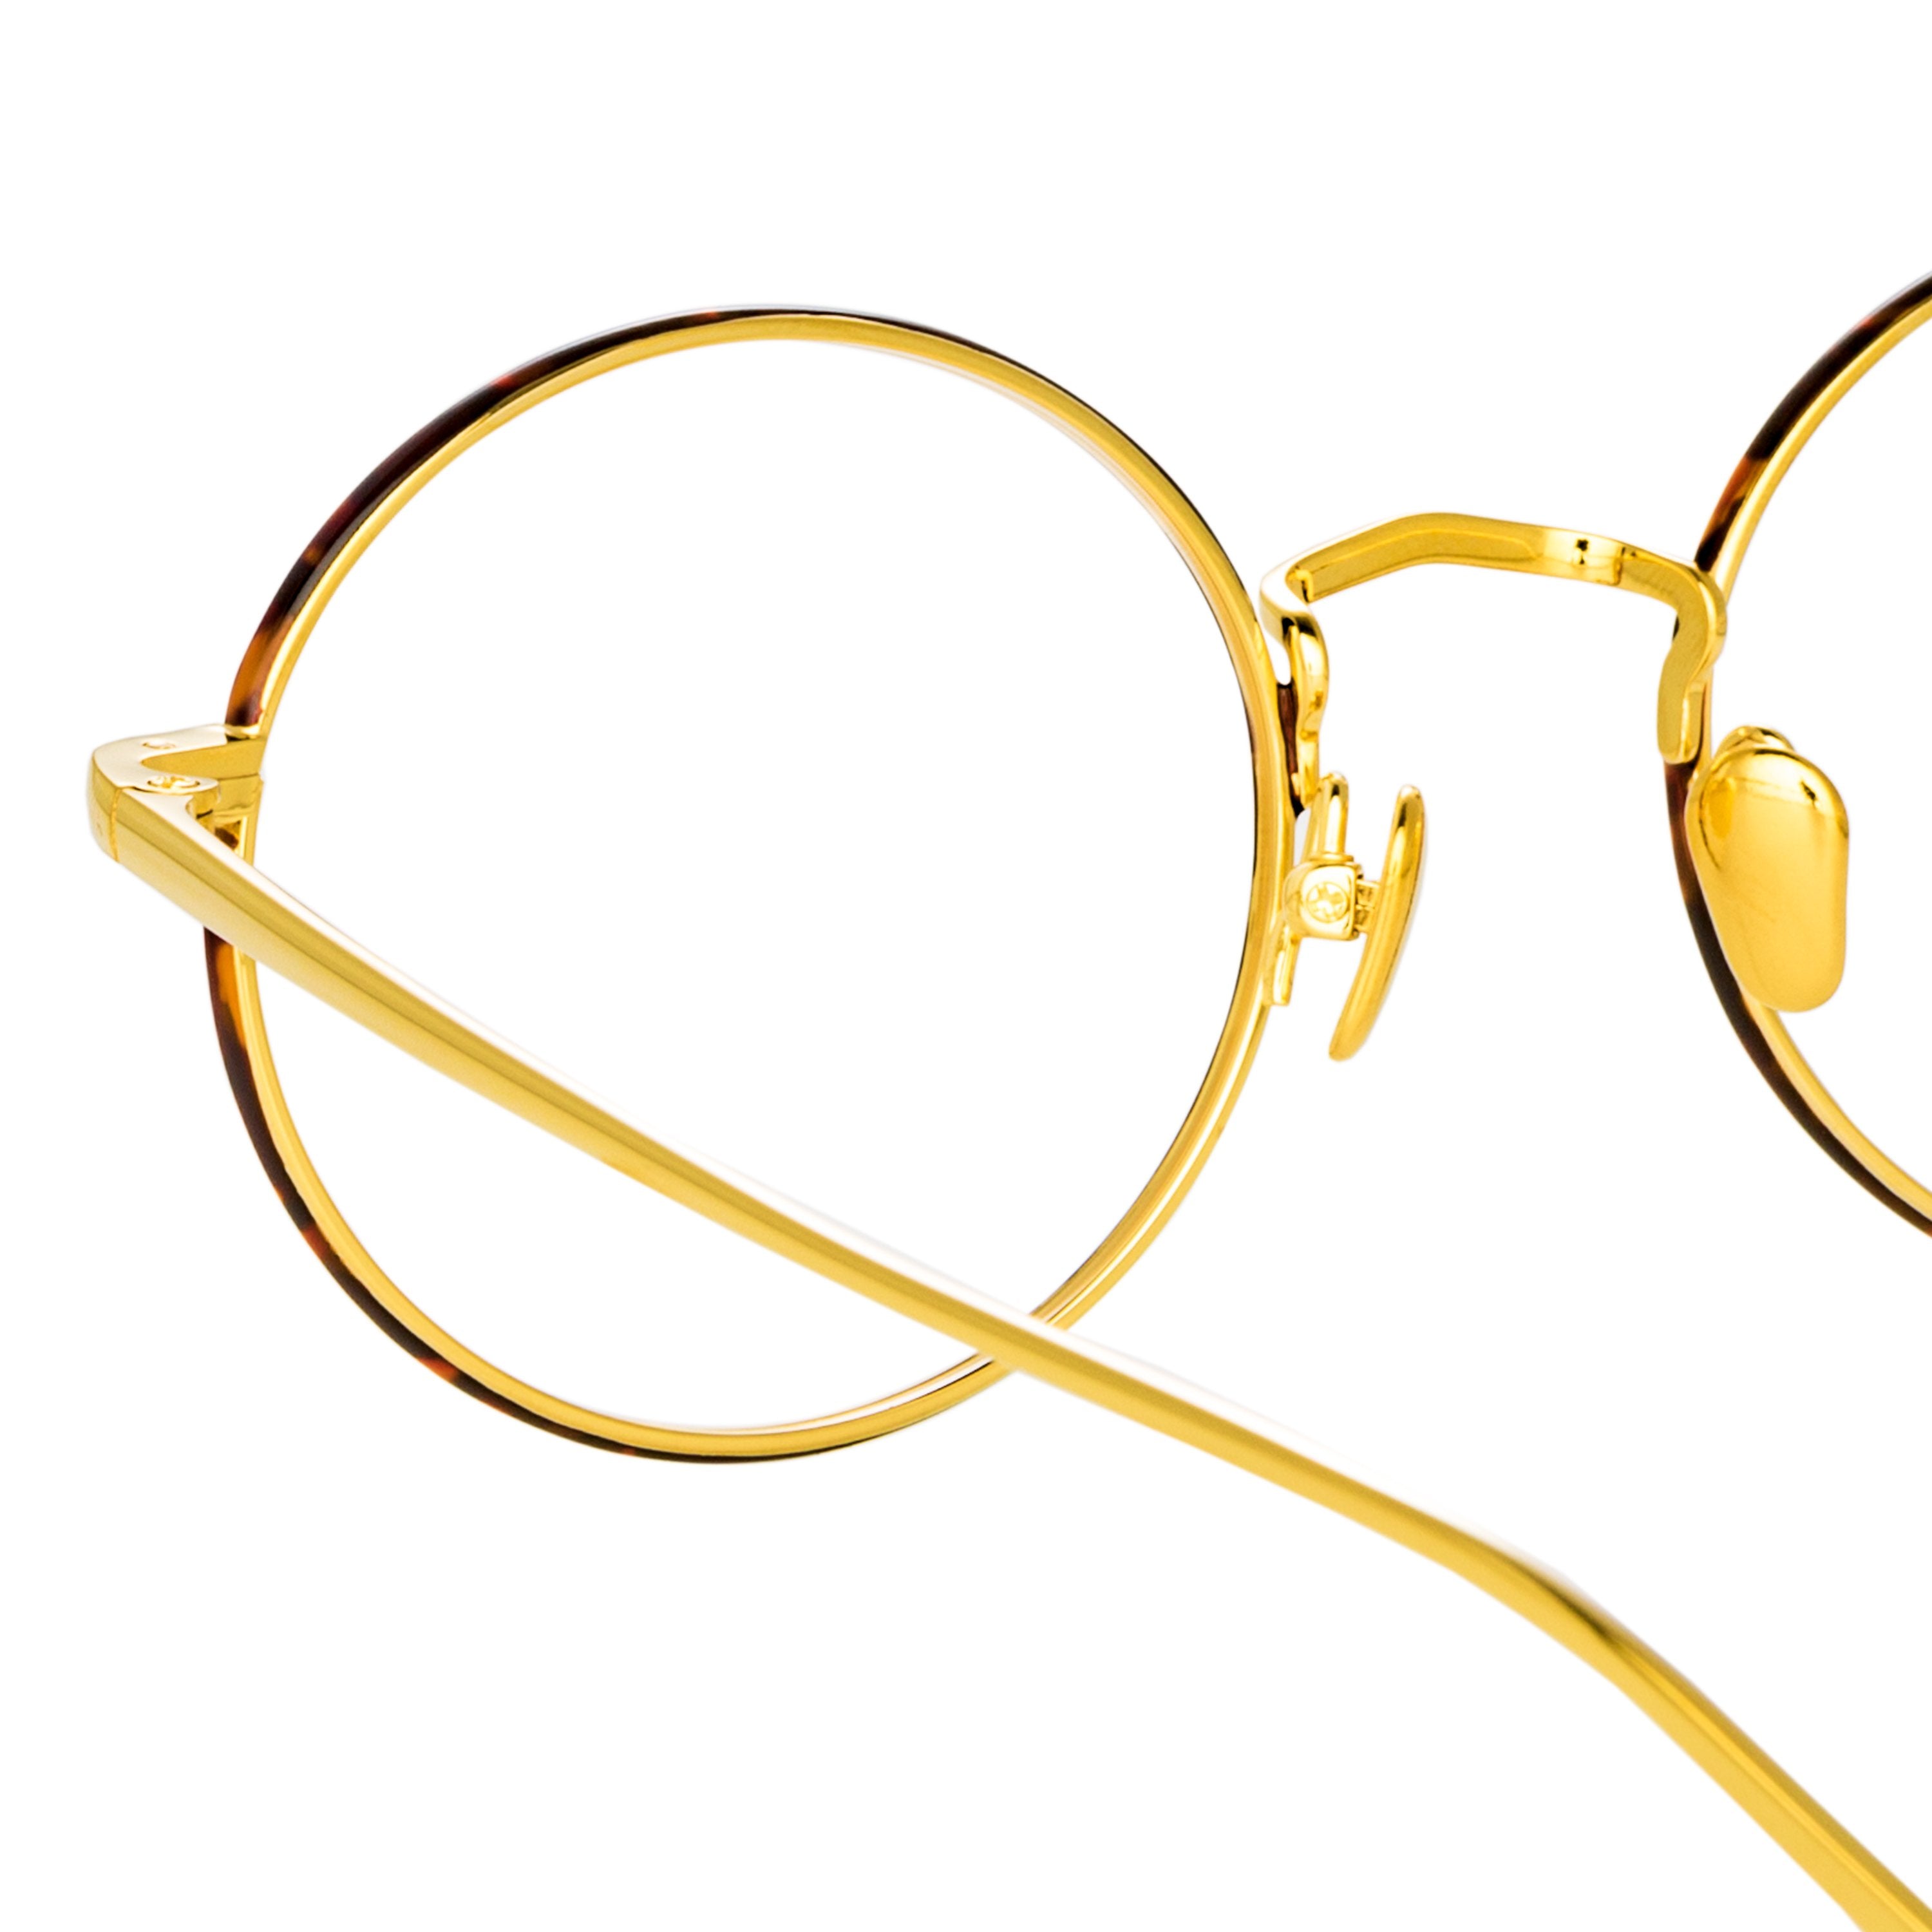 Color_LFL925C5OPT - Adams Oval Optical Frame in Yellow Gold and Tortoiseshell